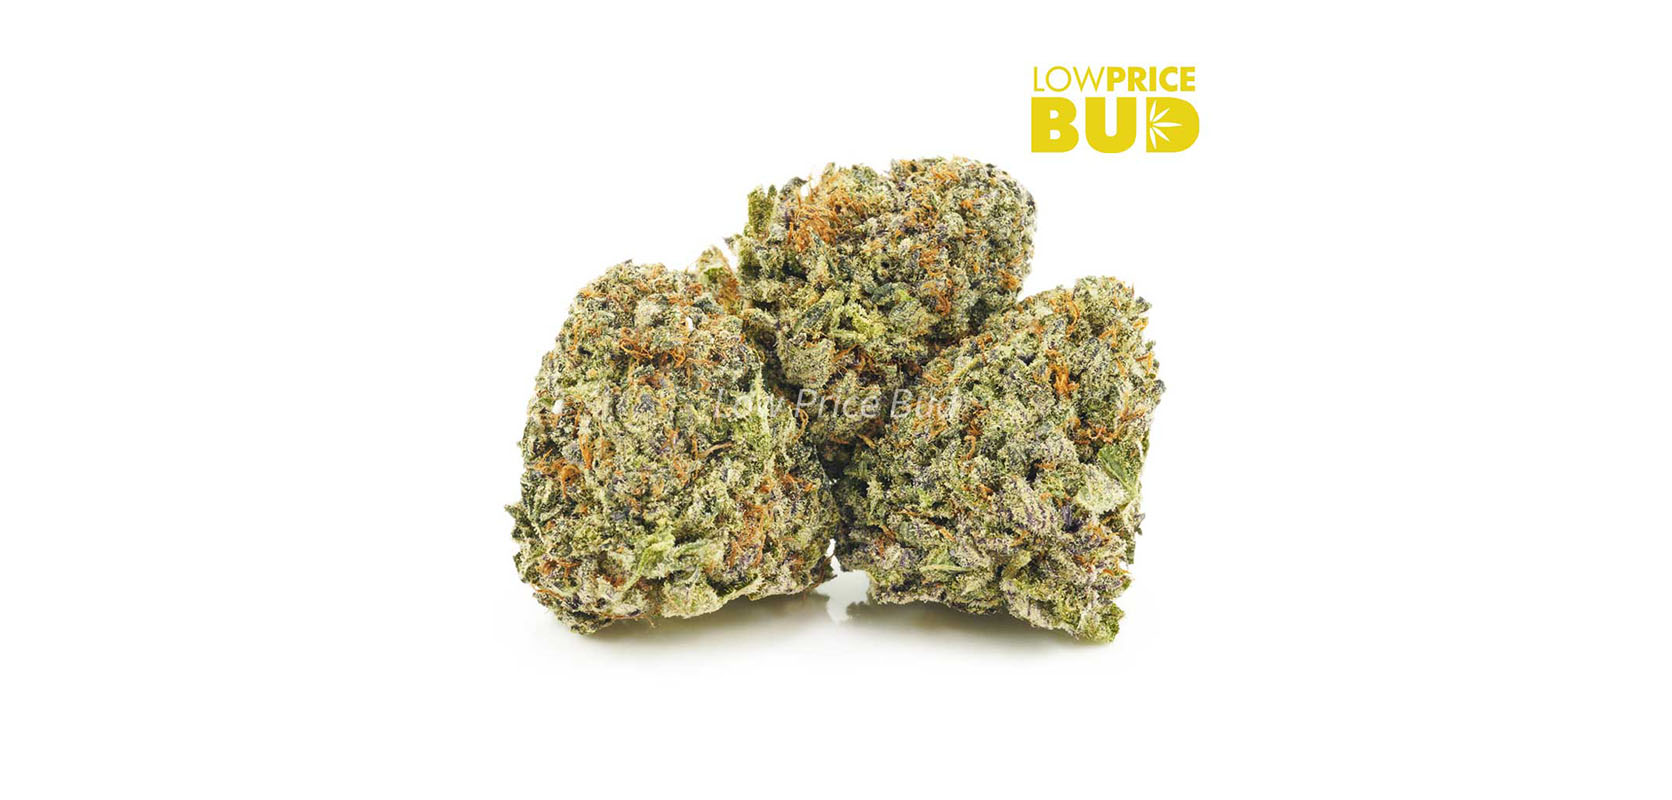 image of black widow strain buy weed online in canada. Online dispensary cannabis canada cheap weed from lowpricebud.co.